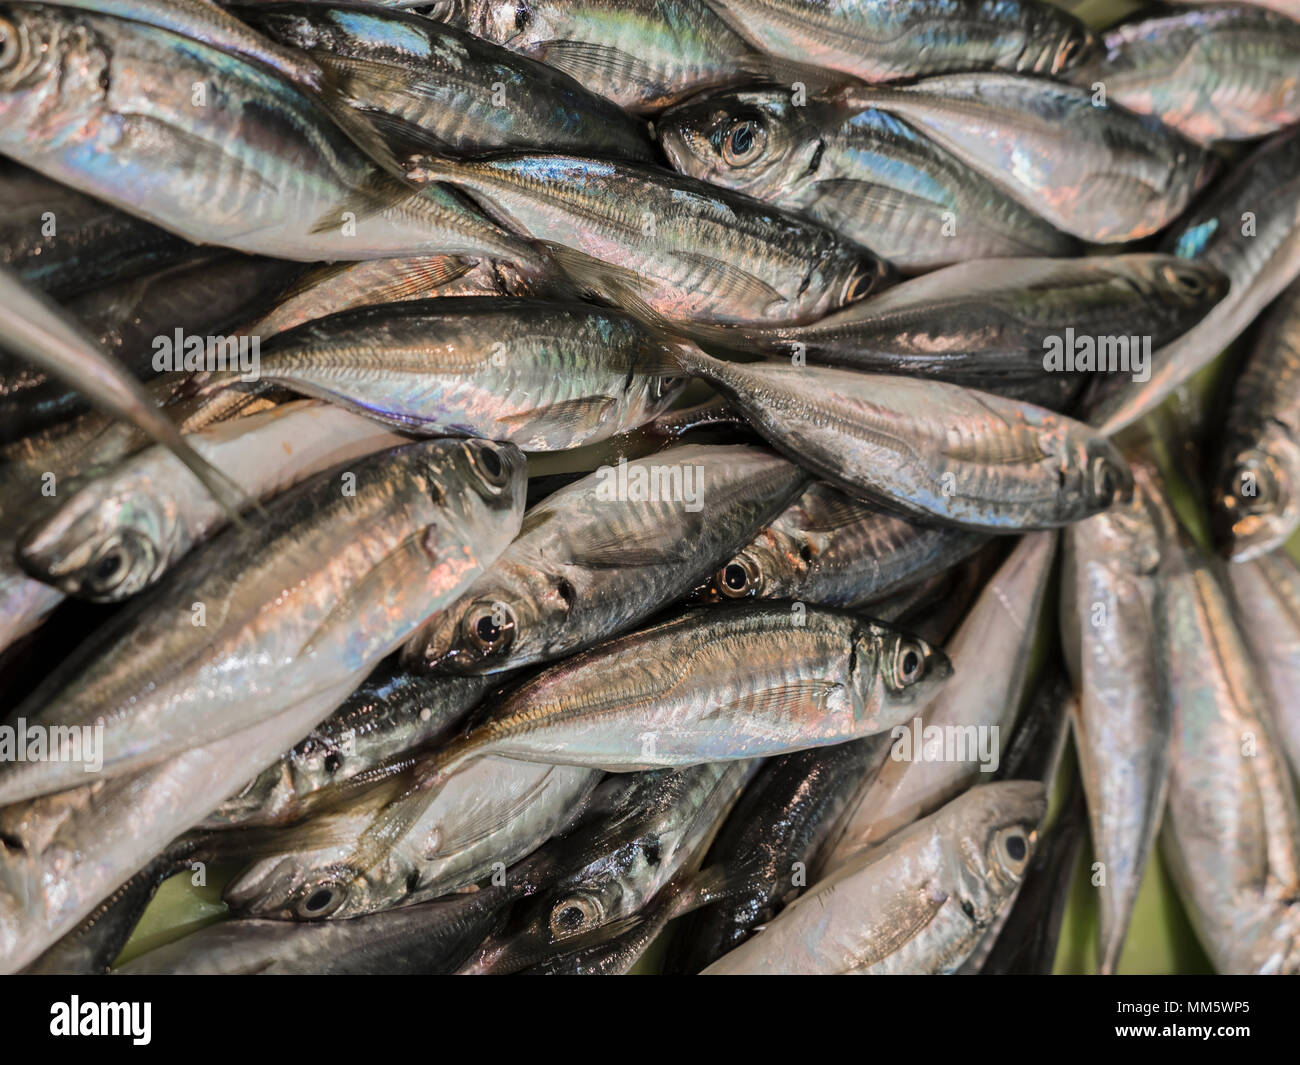 European pilchard for sale at fish market Stock Photo